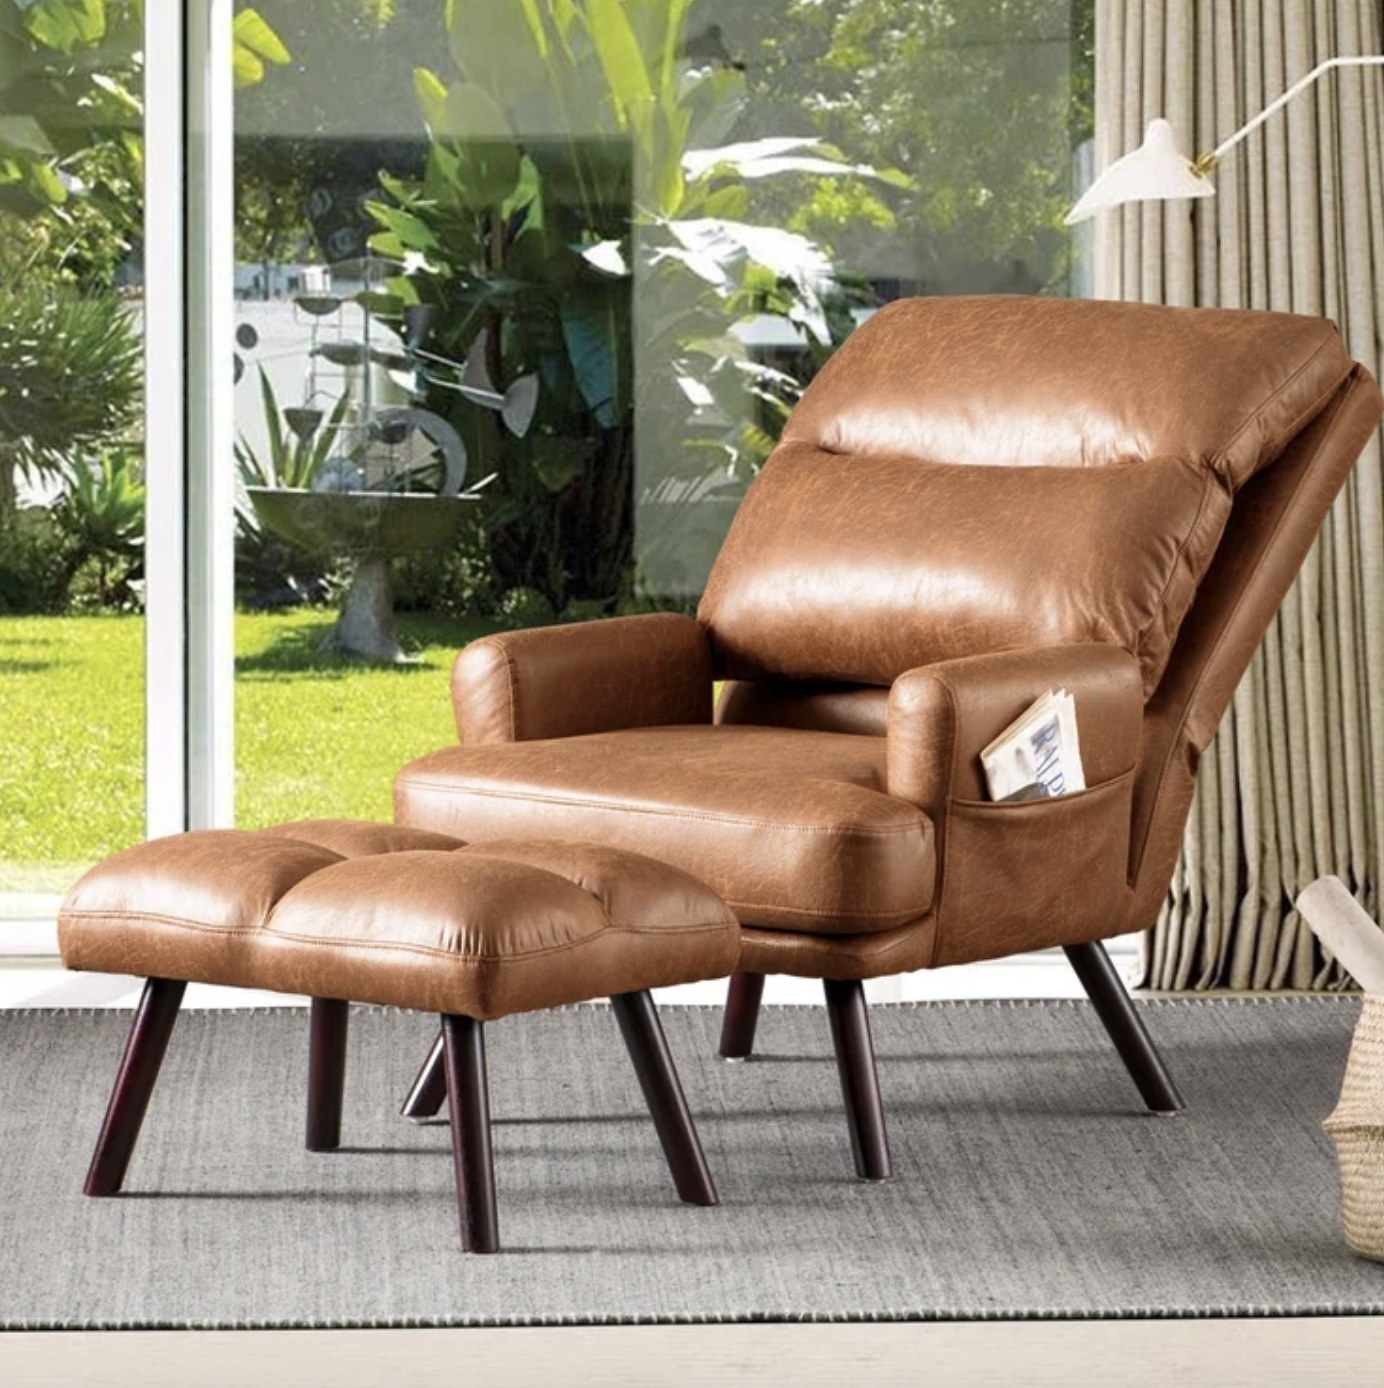 The light brown recliner has a large back cushion and smaller cushioning on the ottoman